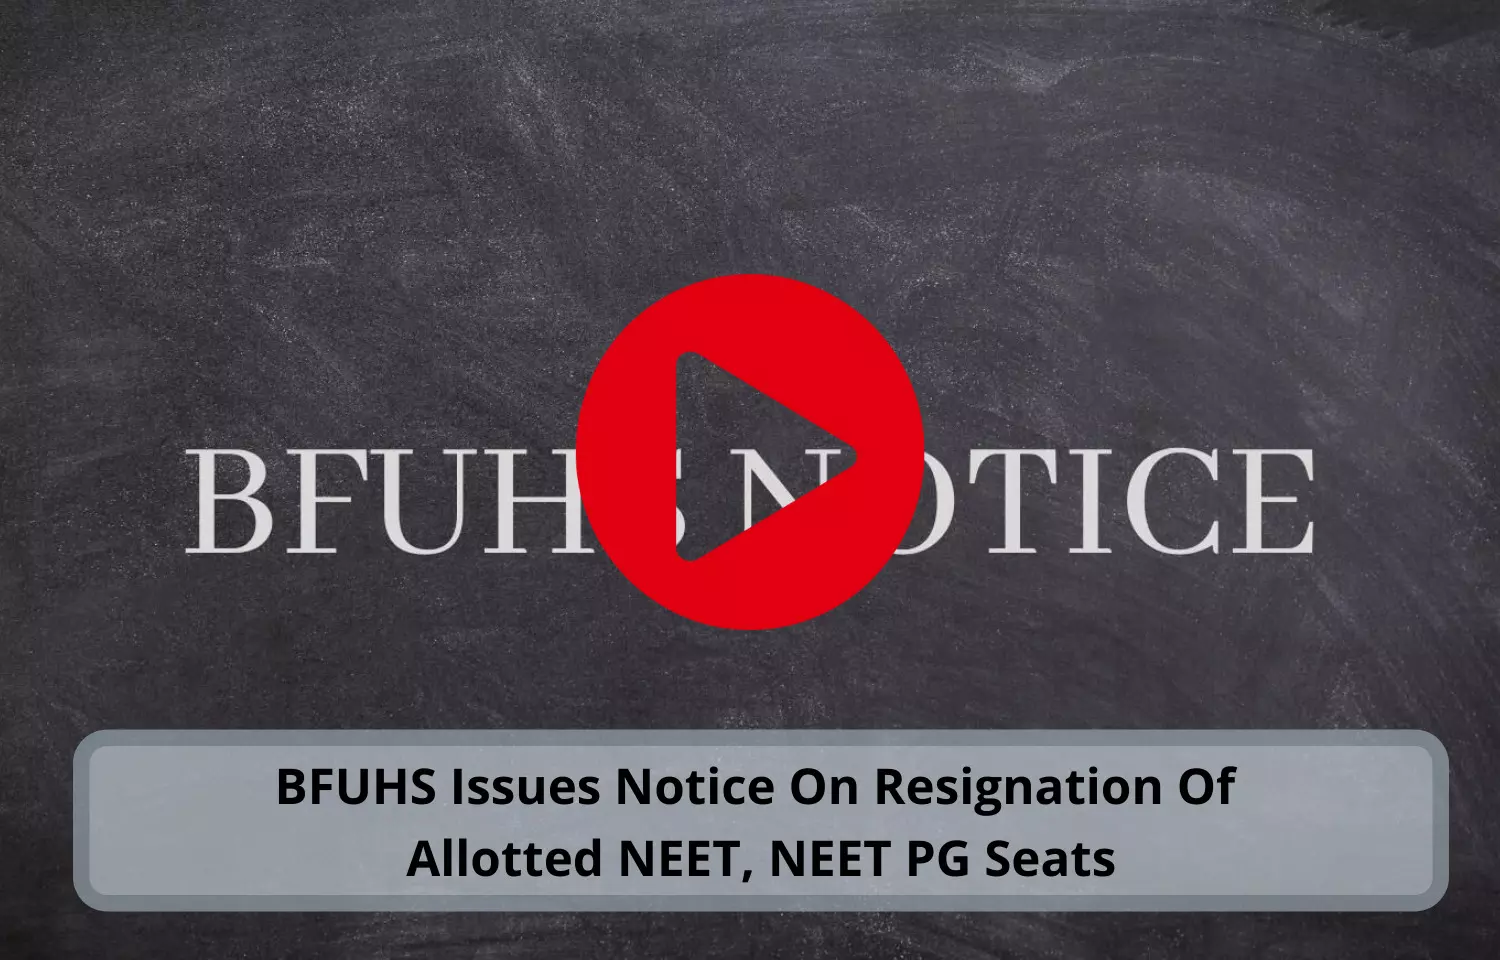 BFUHS Issues Notice On Resignation Of Allotted NEET, NEET PG Seats